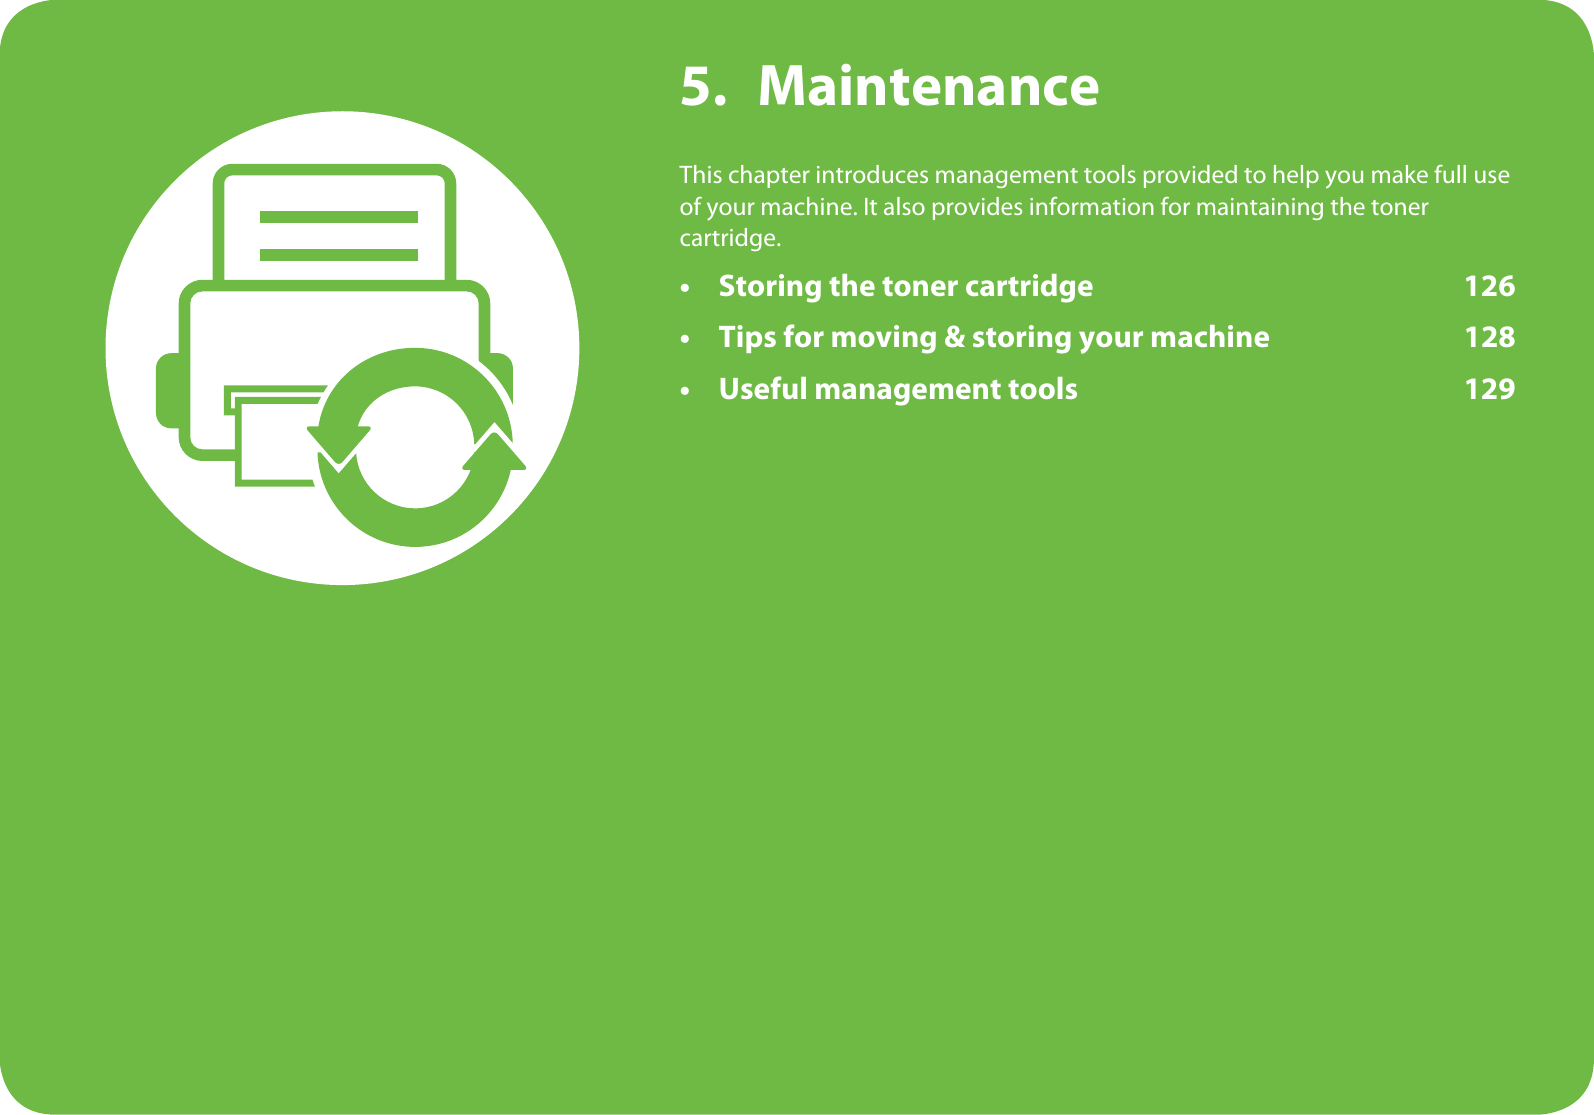 5. MaintenanceThis chapter introduces management tools provided to help you make full use of your machine. It also provides information for maintaining the toner cartridge.• Storing the toner cartridge 126• Tips for moving &amp; storing your machine 128• Useful management tools 129